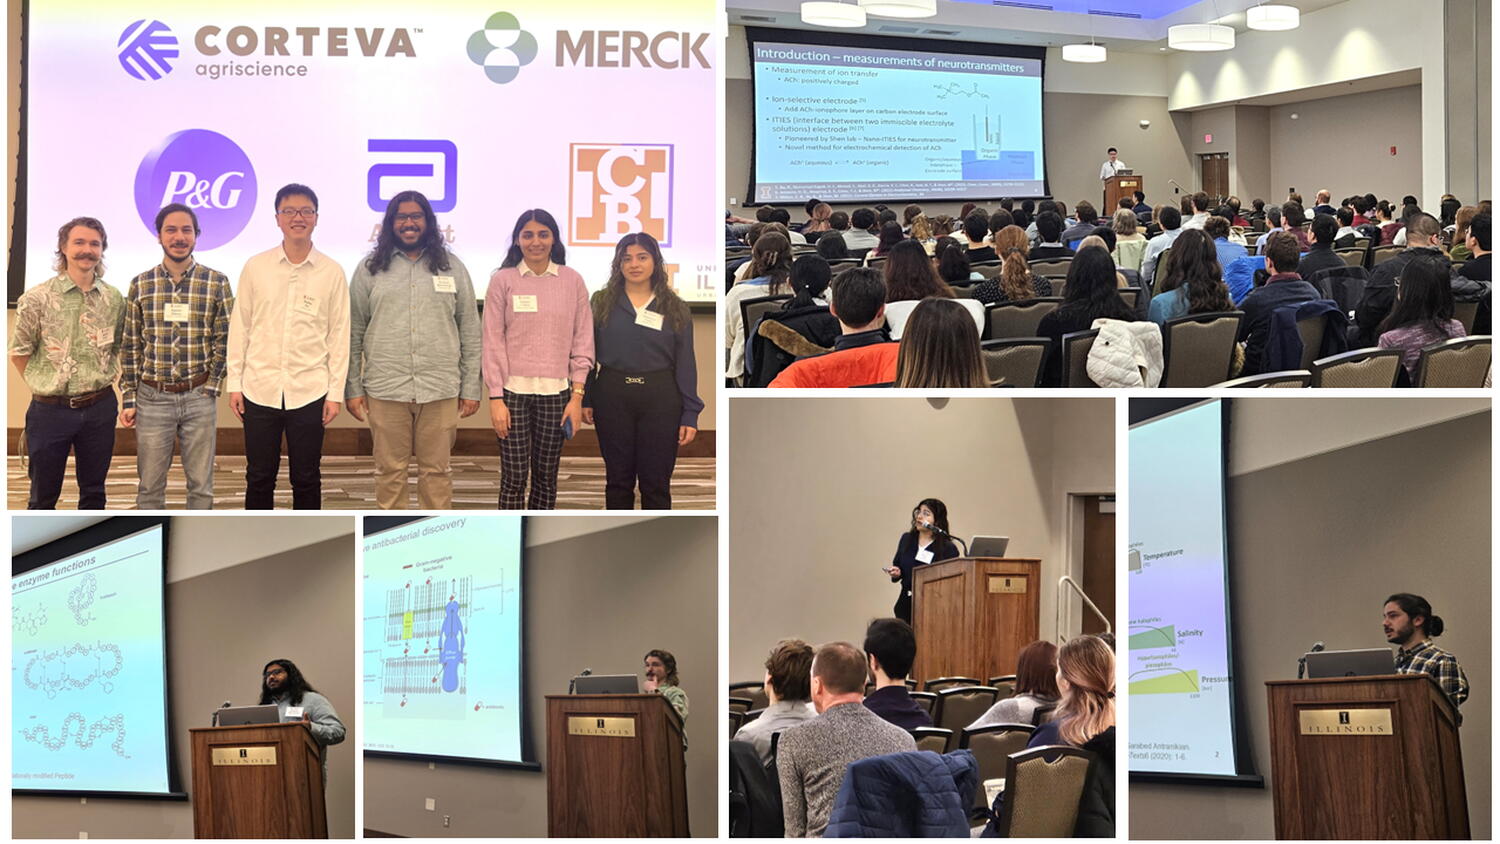 Collage of photos showing six student presenters standing side by side and then individual photos of them speaking at the podium.